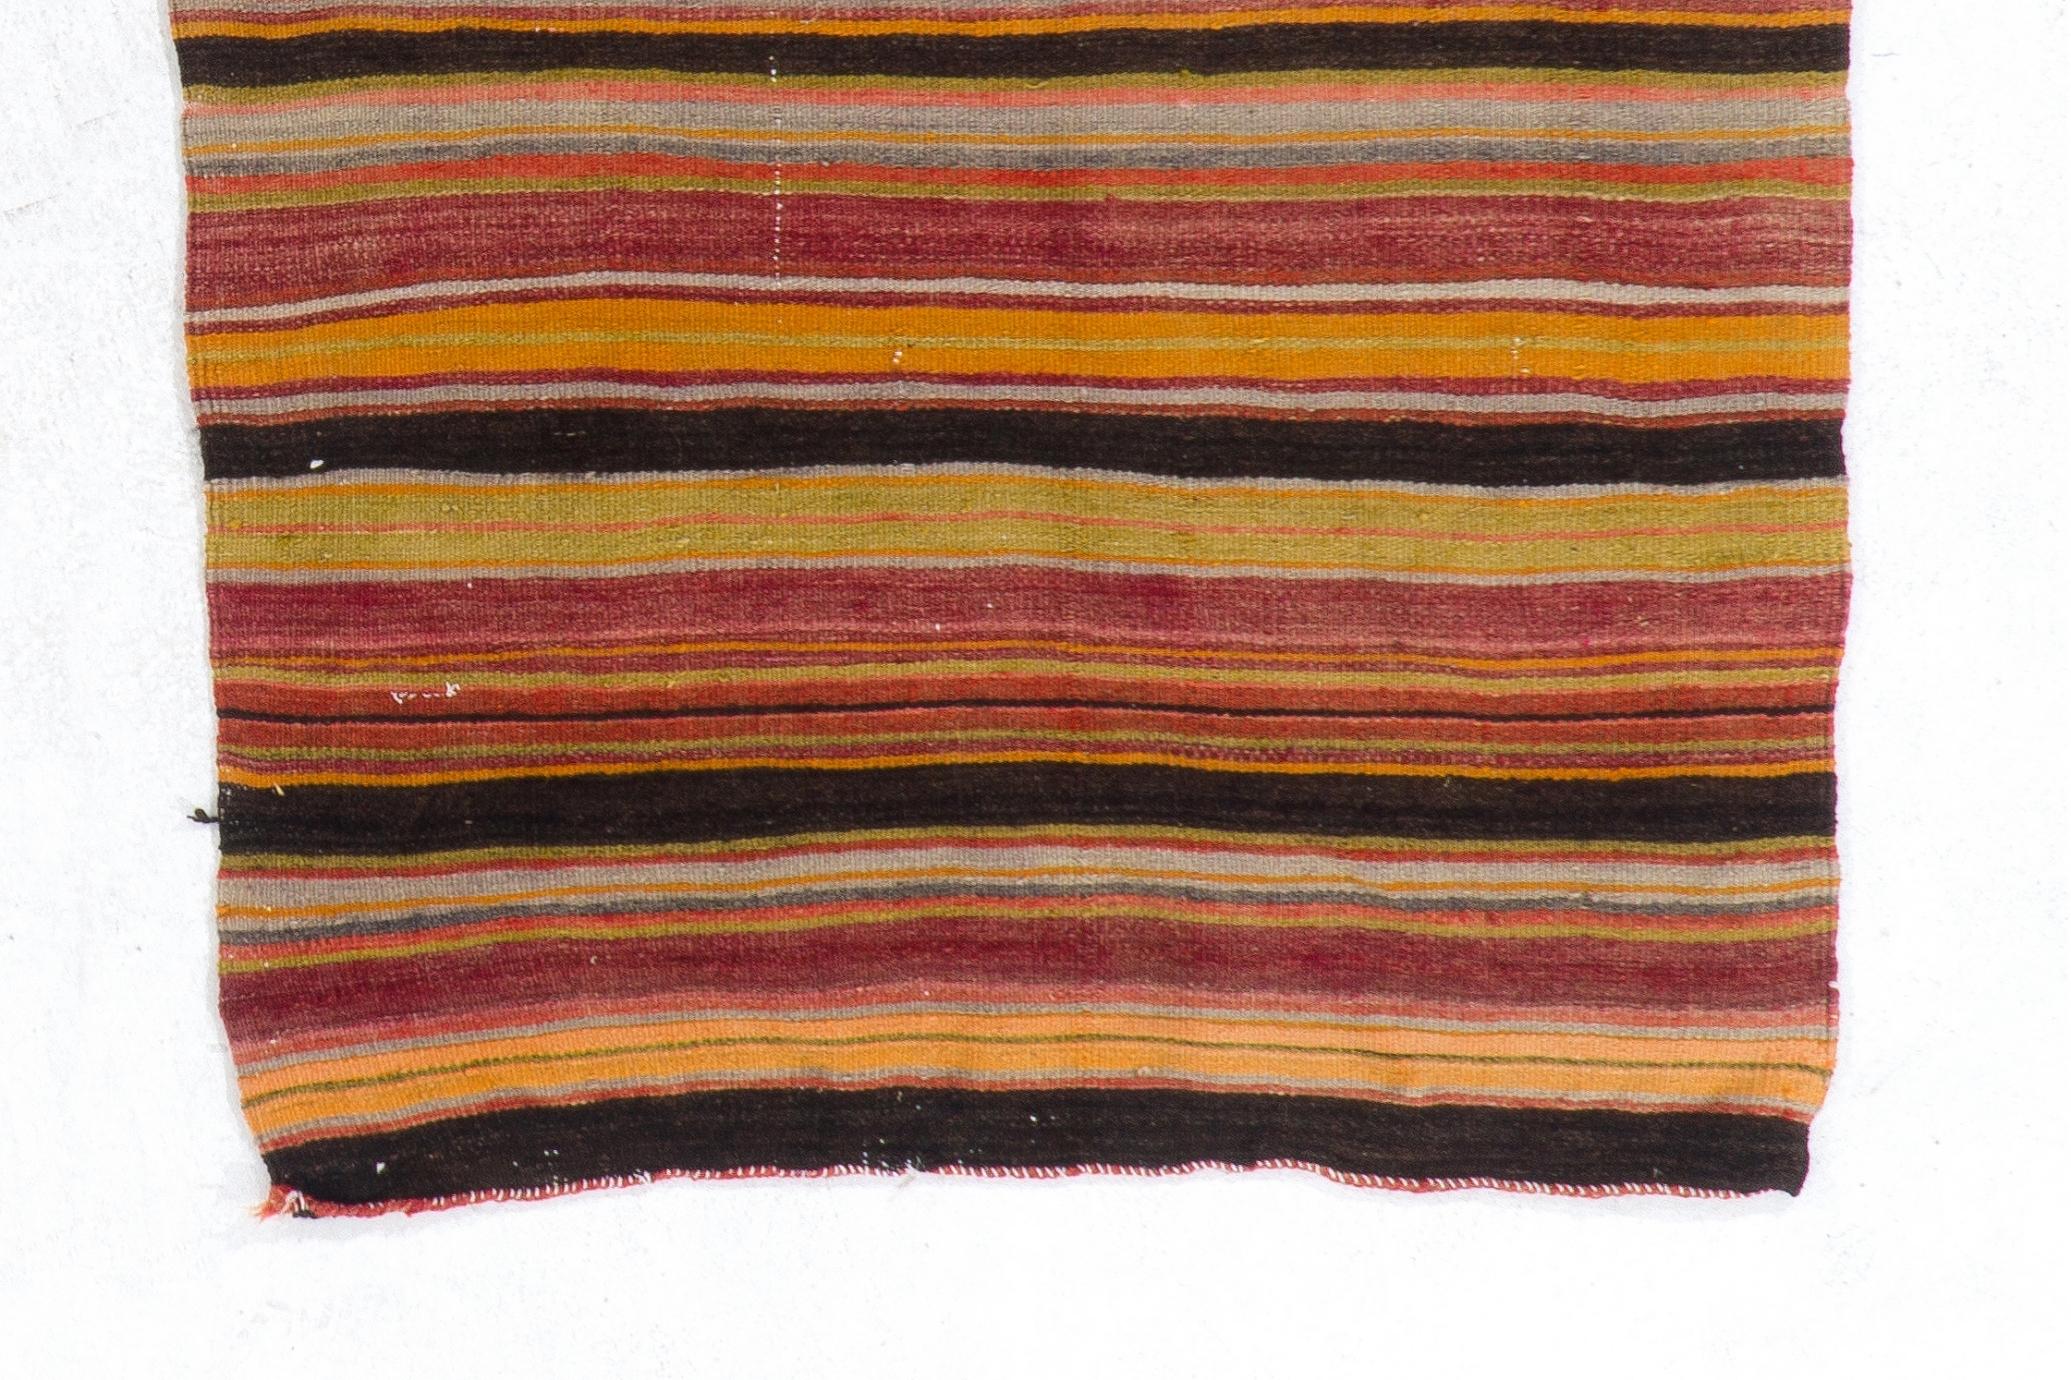 Hand-Woven 3.2x4.3 ft Vintage Striped Handwoven Turkish Wool Accent Kilim / Flat-Weave For Sale